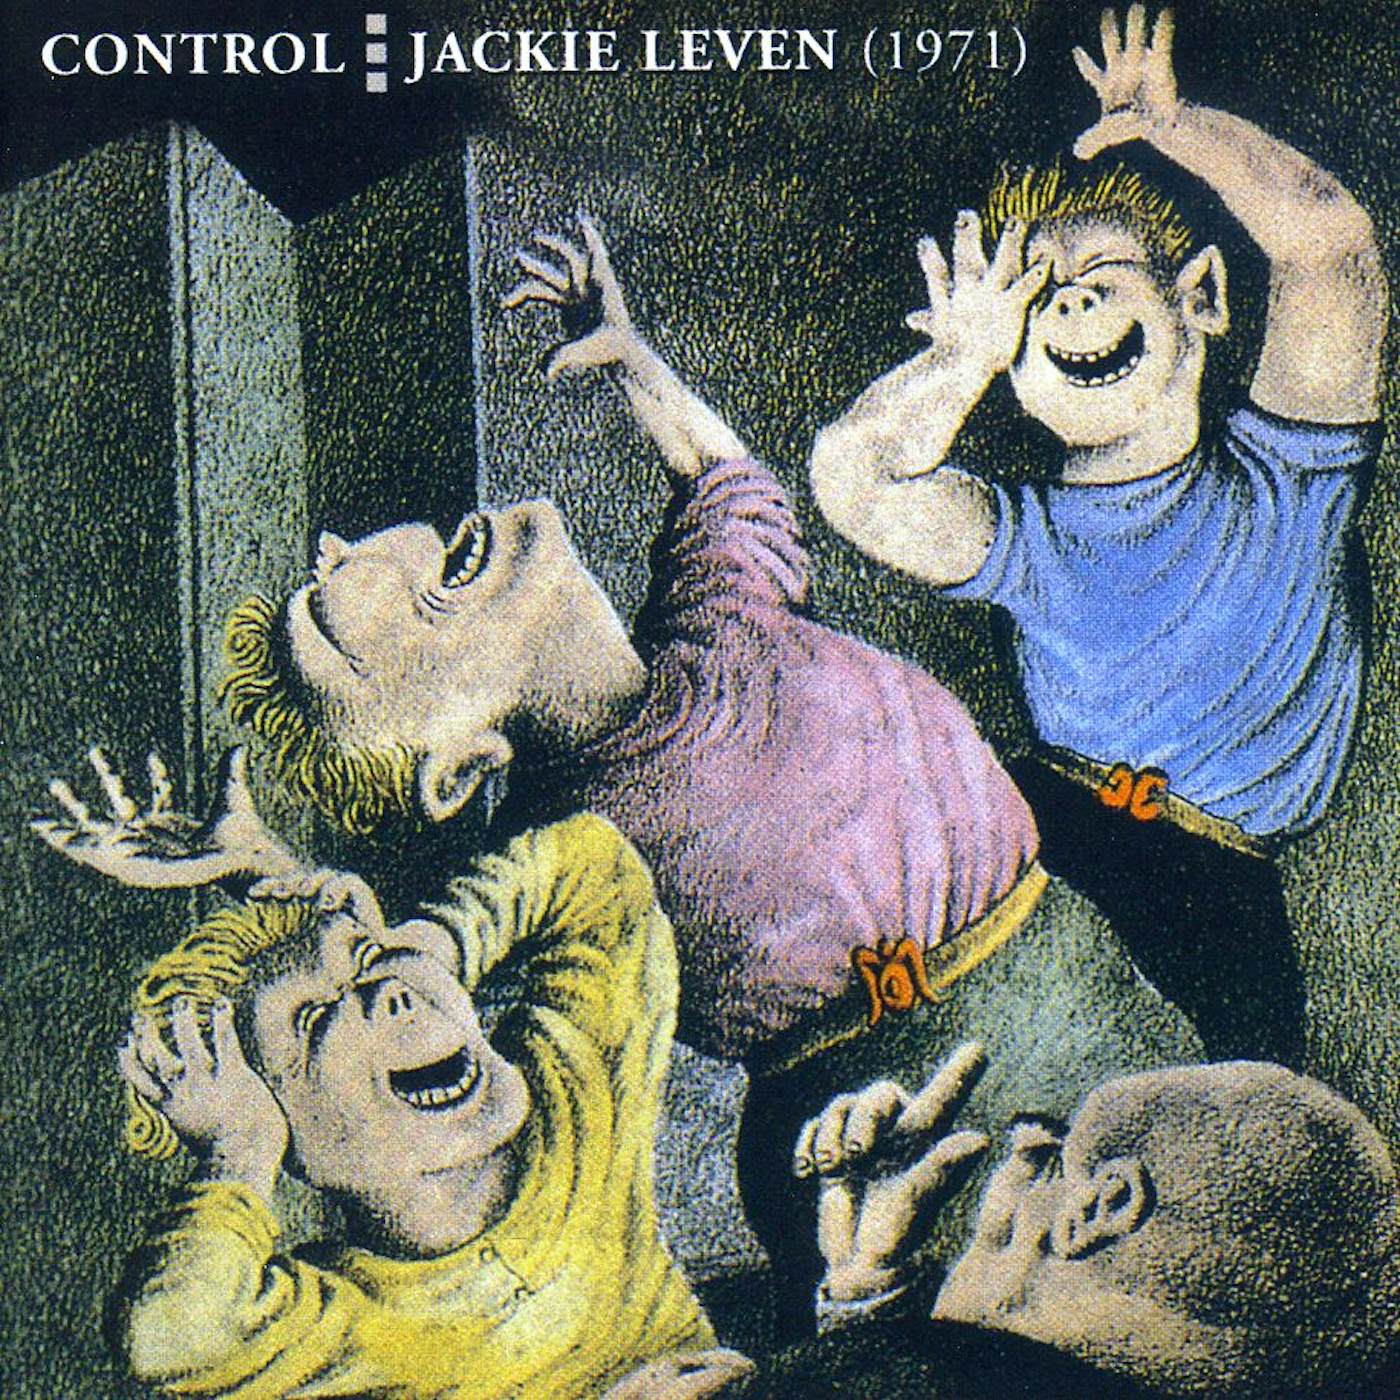 Jackie Leven CONTROL (1971) CD